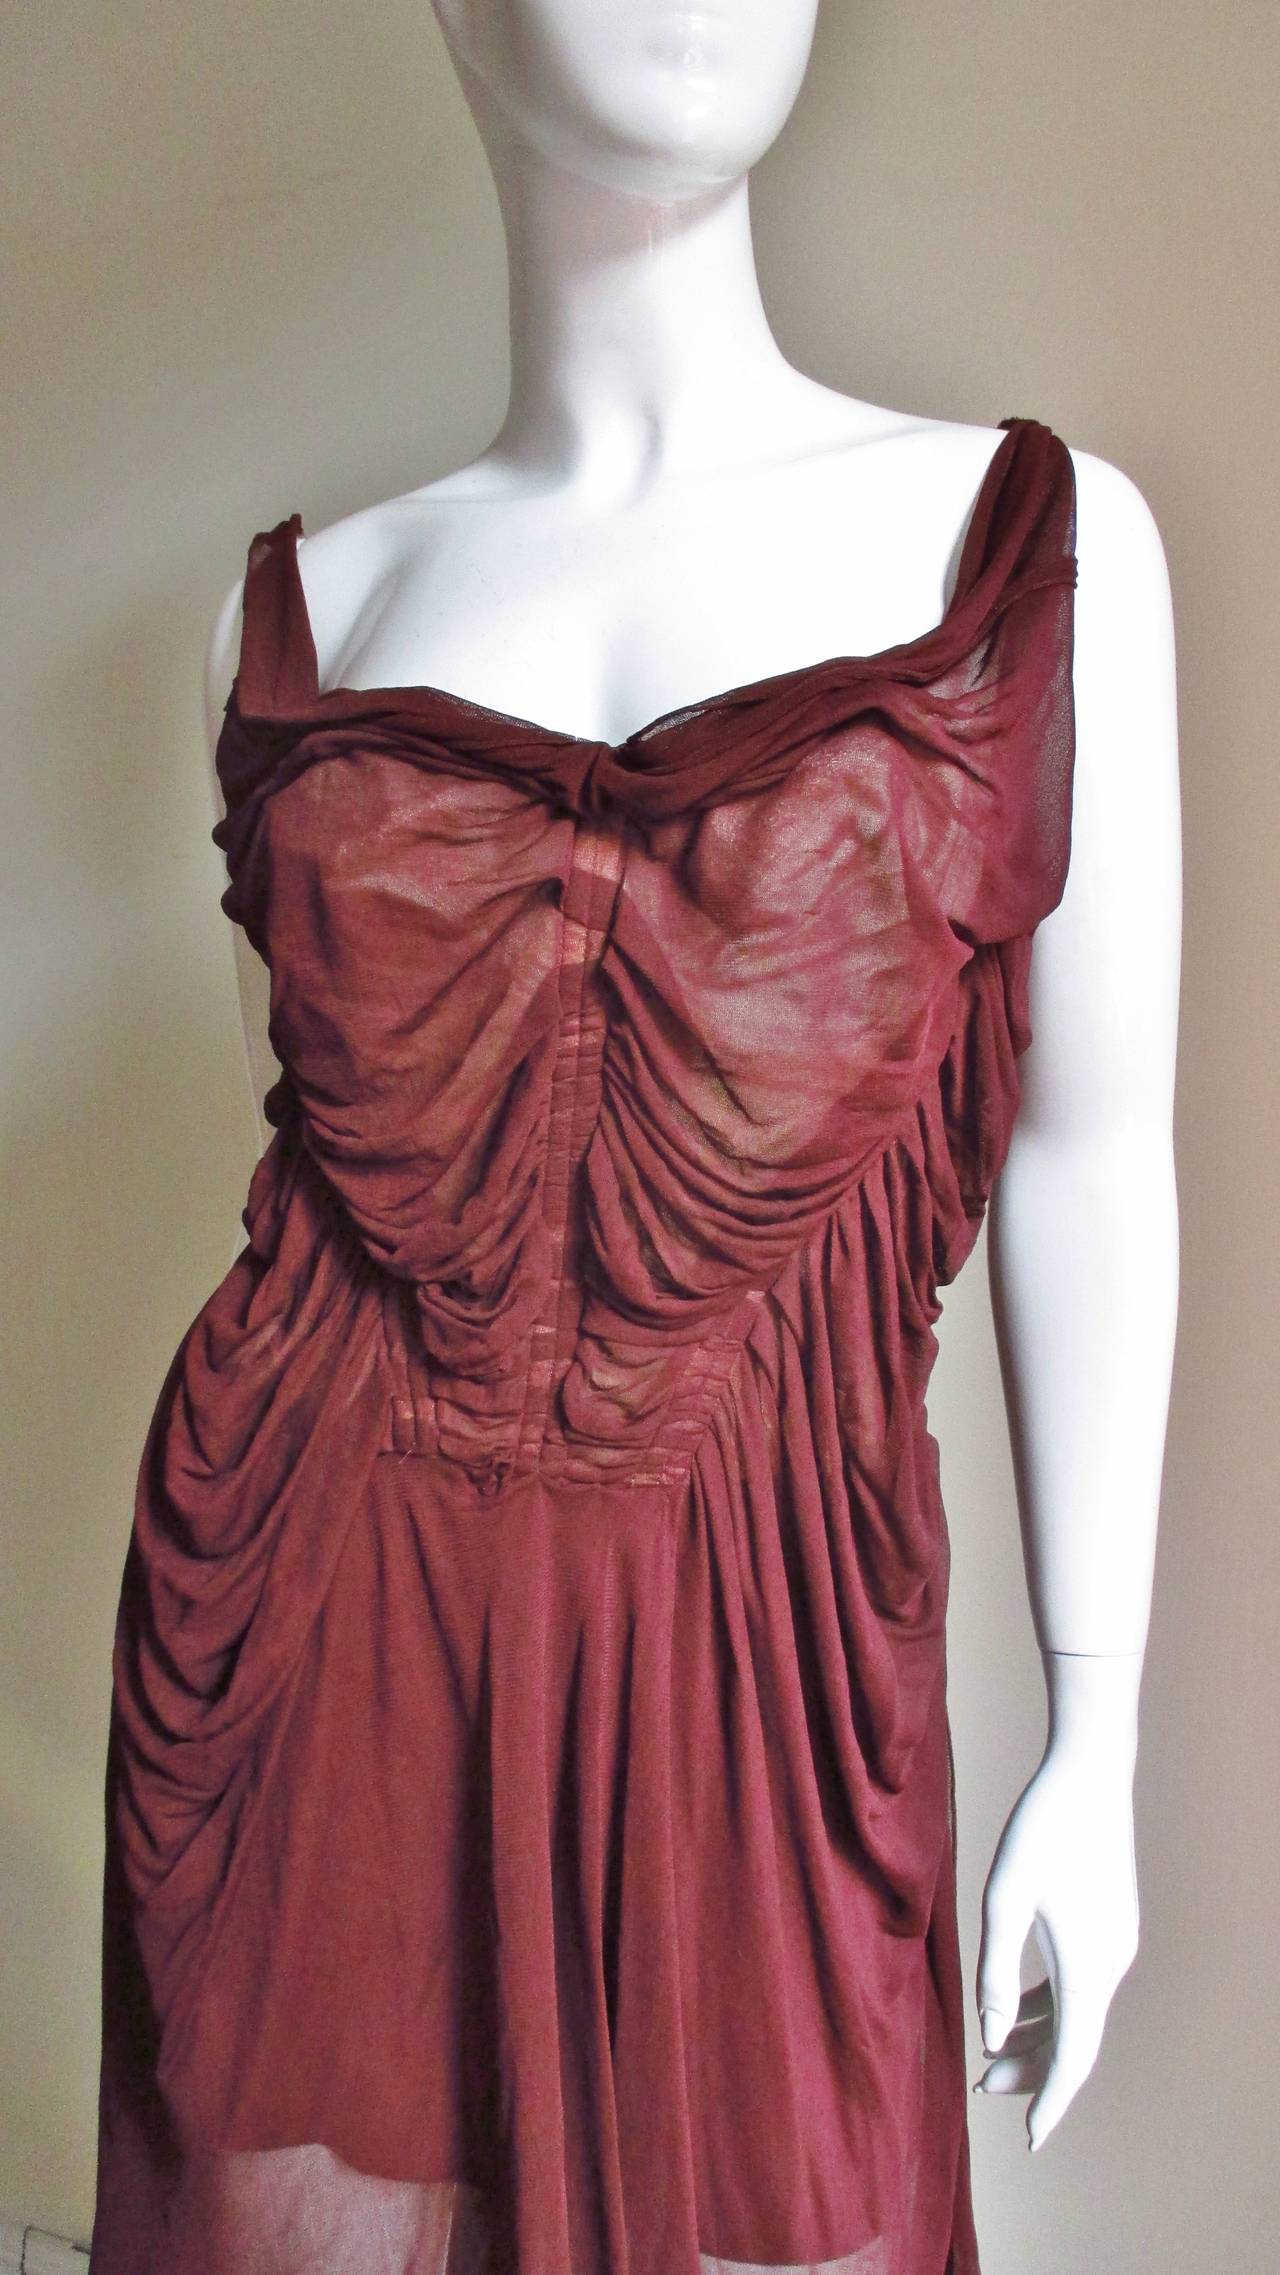 A delicate sheer maroon silk corset dress from Jean Paul Gaultier.  It has a  draped ruched bodice with small straps and laces up at the back.  There is draping along the sides at the waist and the skirt has seams at different angles which fall into